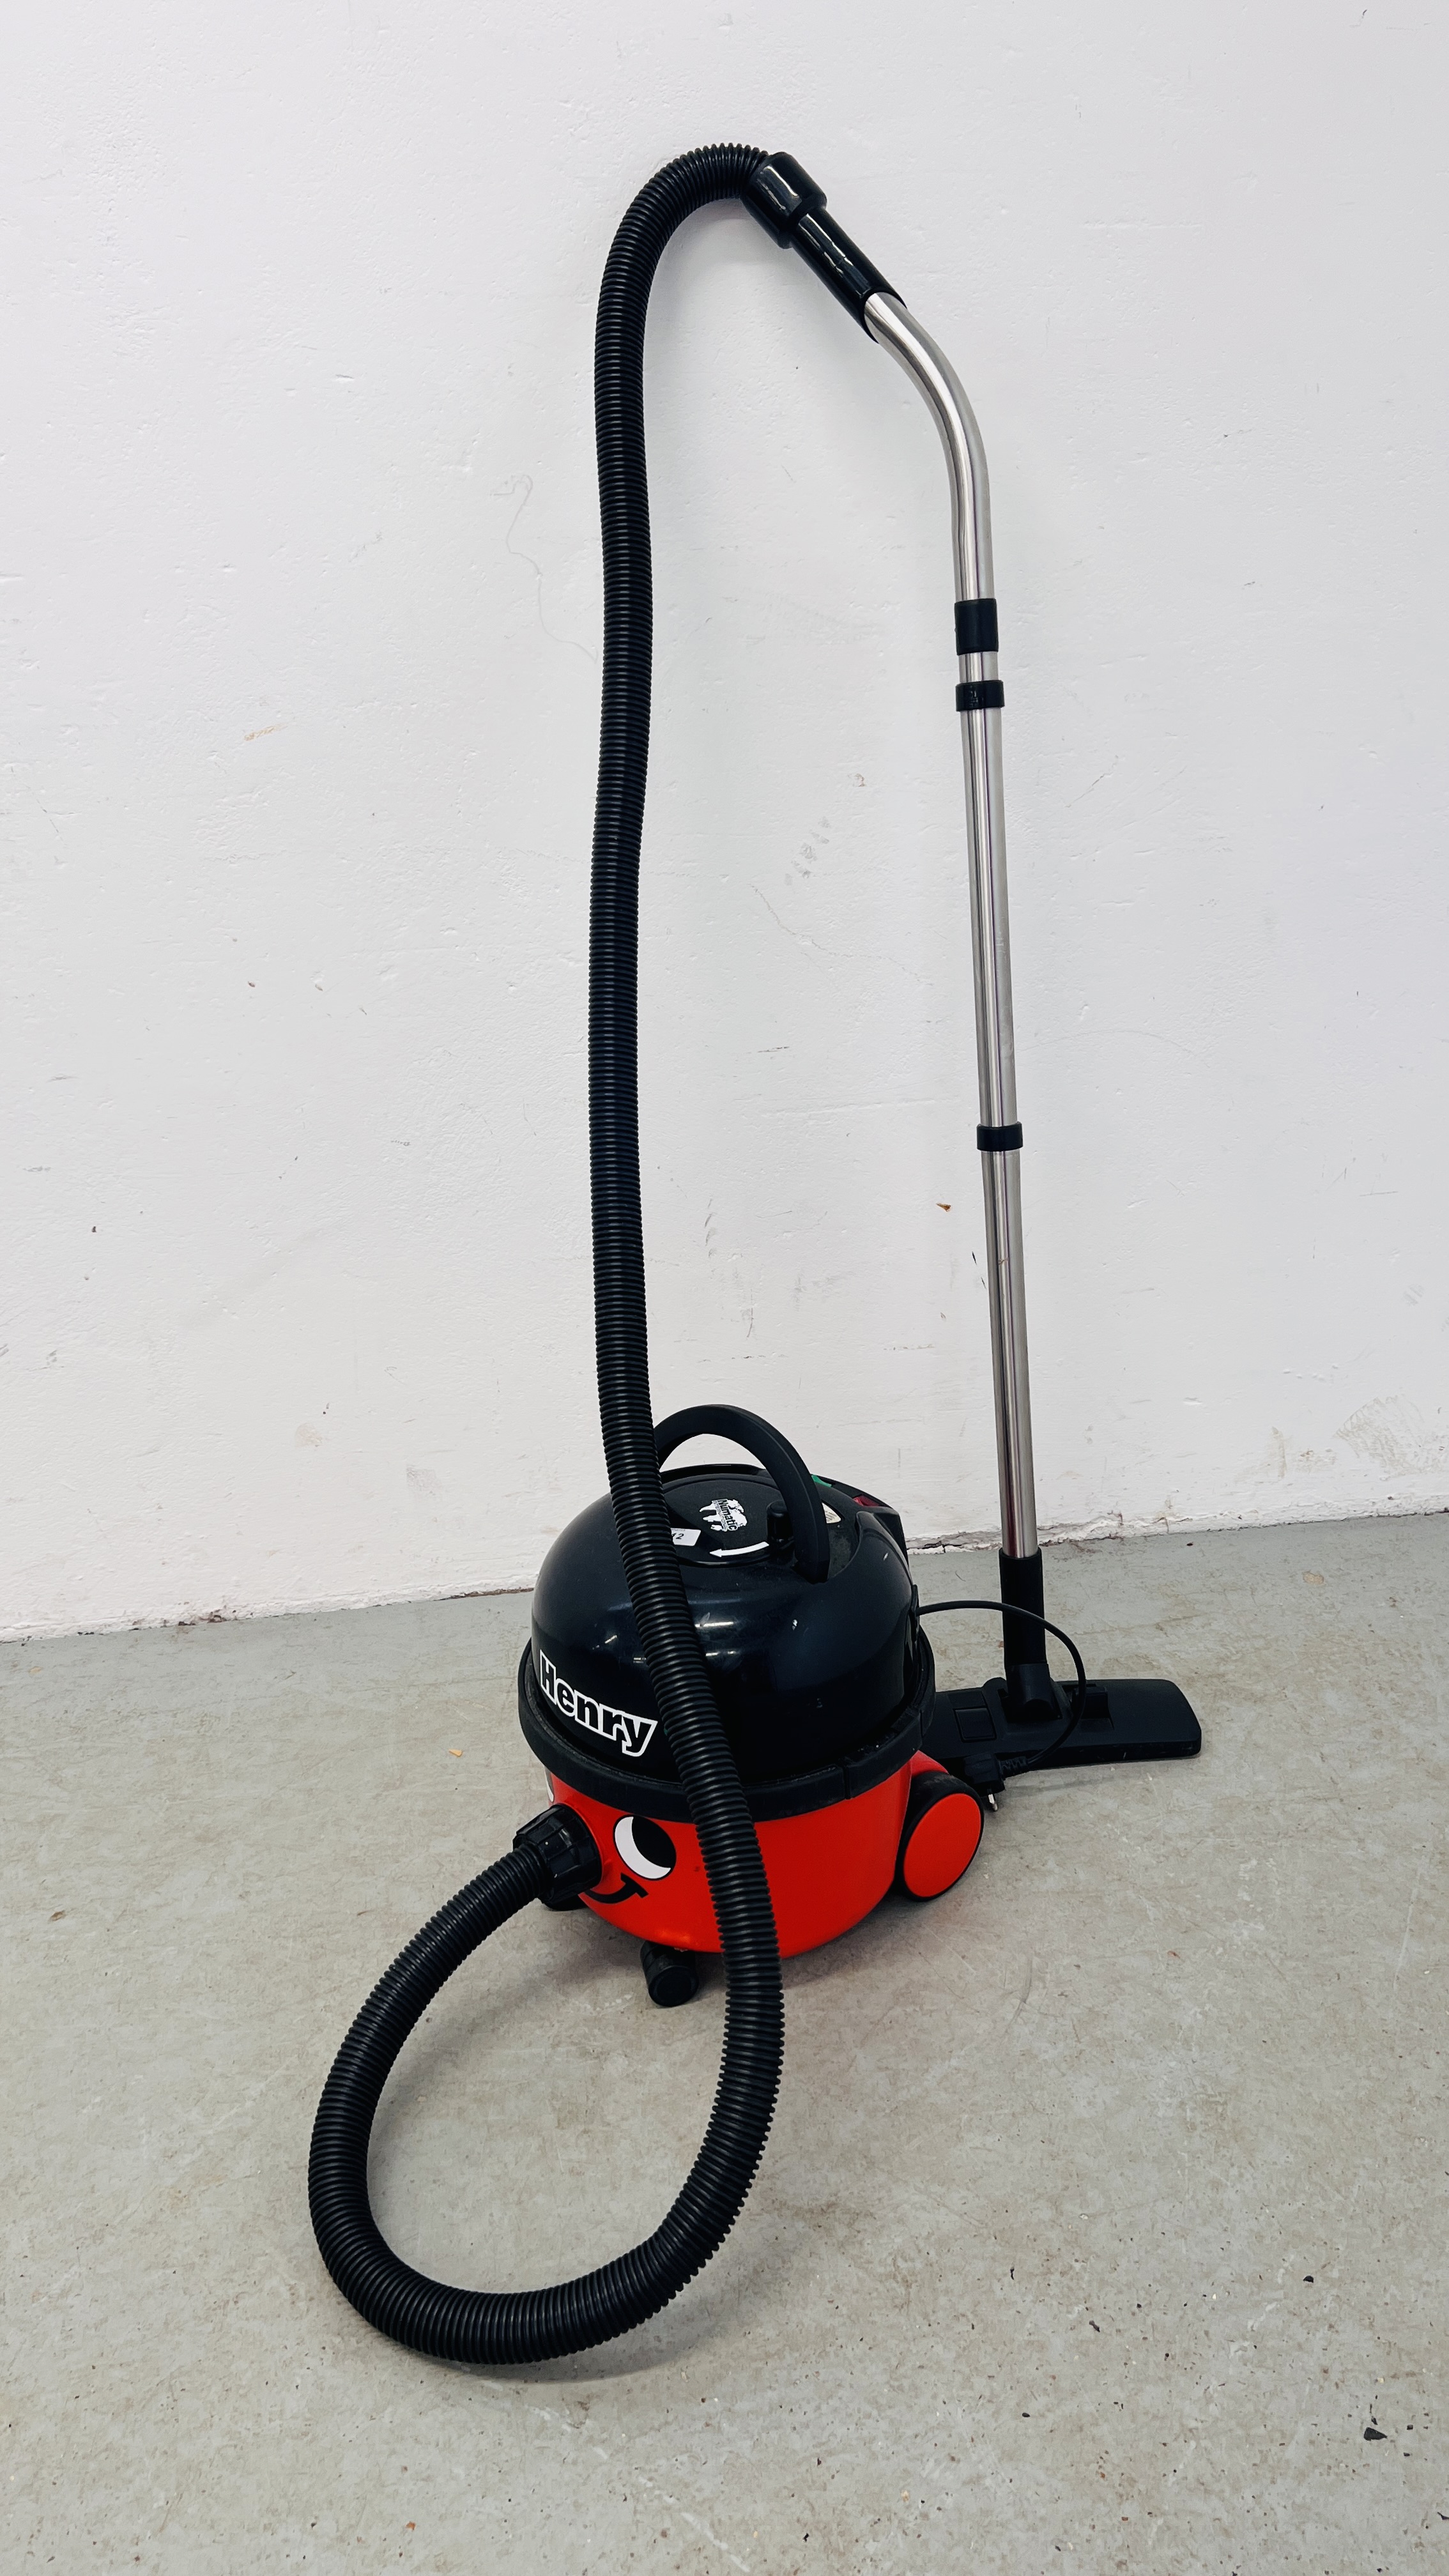 PNEUMATIC HENRY VACUUM CLEANER - SOLD AS SEEN.